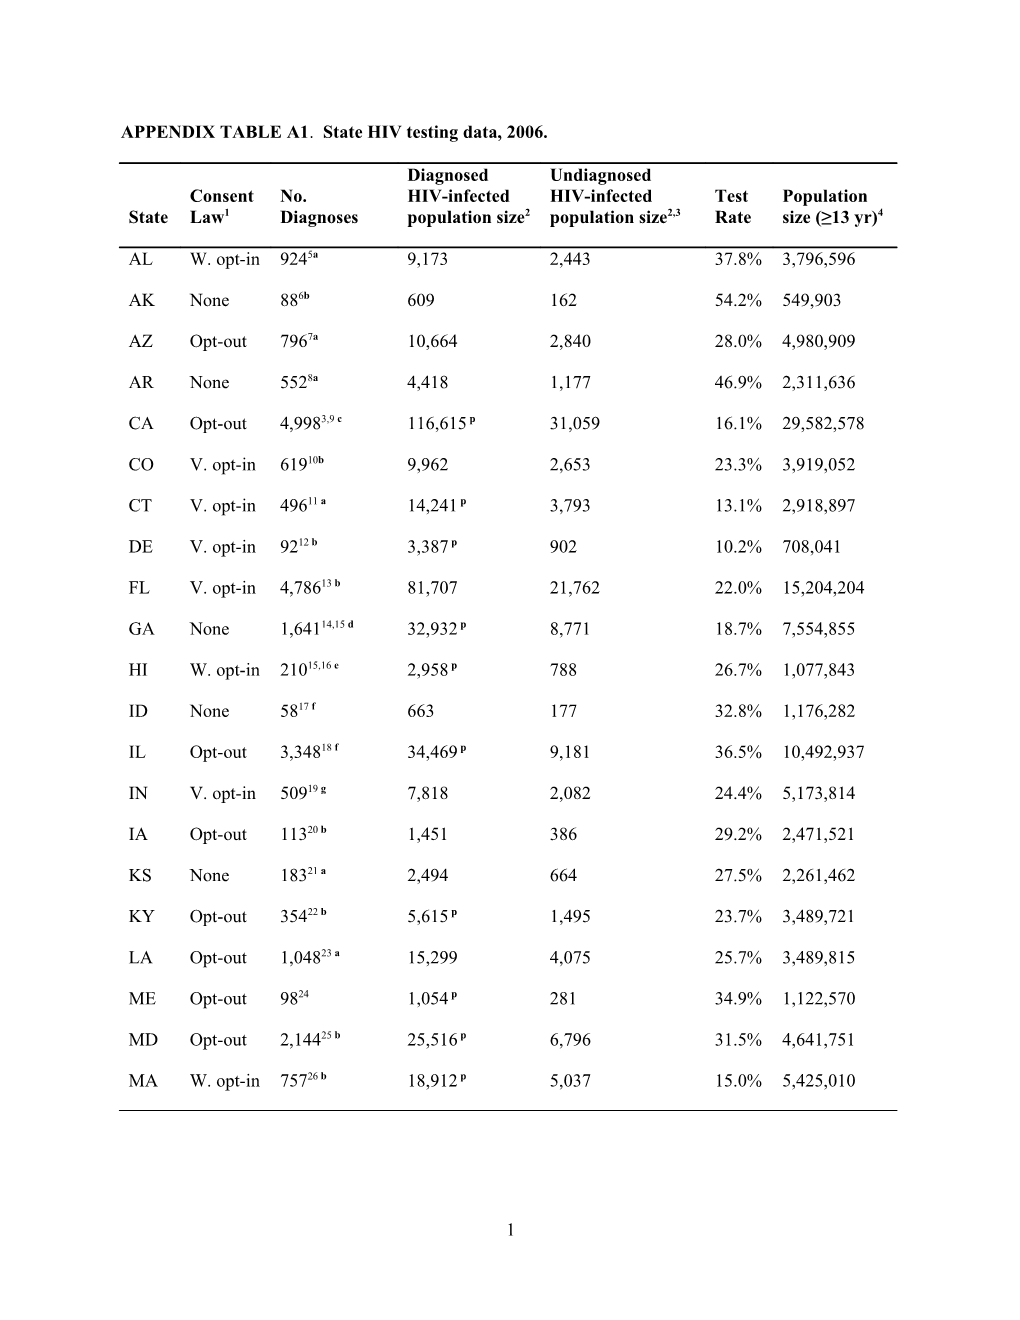 APPENDIX TABLE A1. State HIV Testing Data, 2006